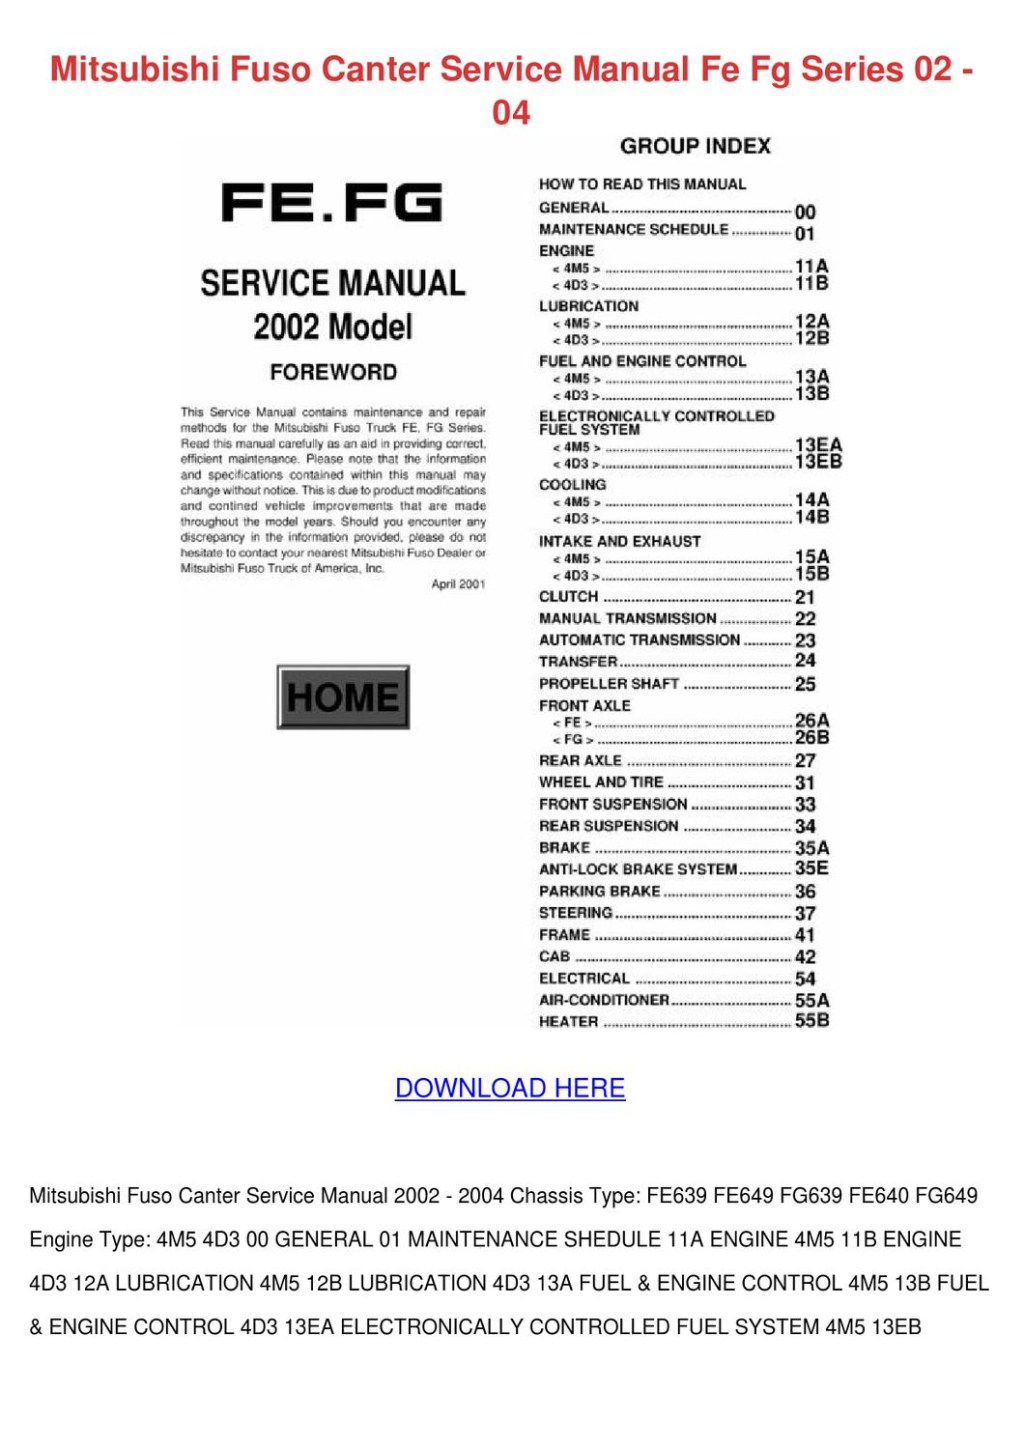 Picture of: Mitsubishi Fuso Canter Service Manual Fe Fg S by JereHarless – Issuu